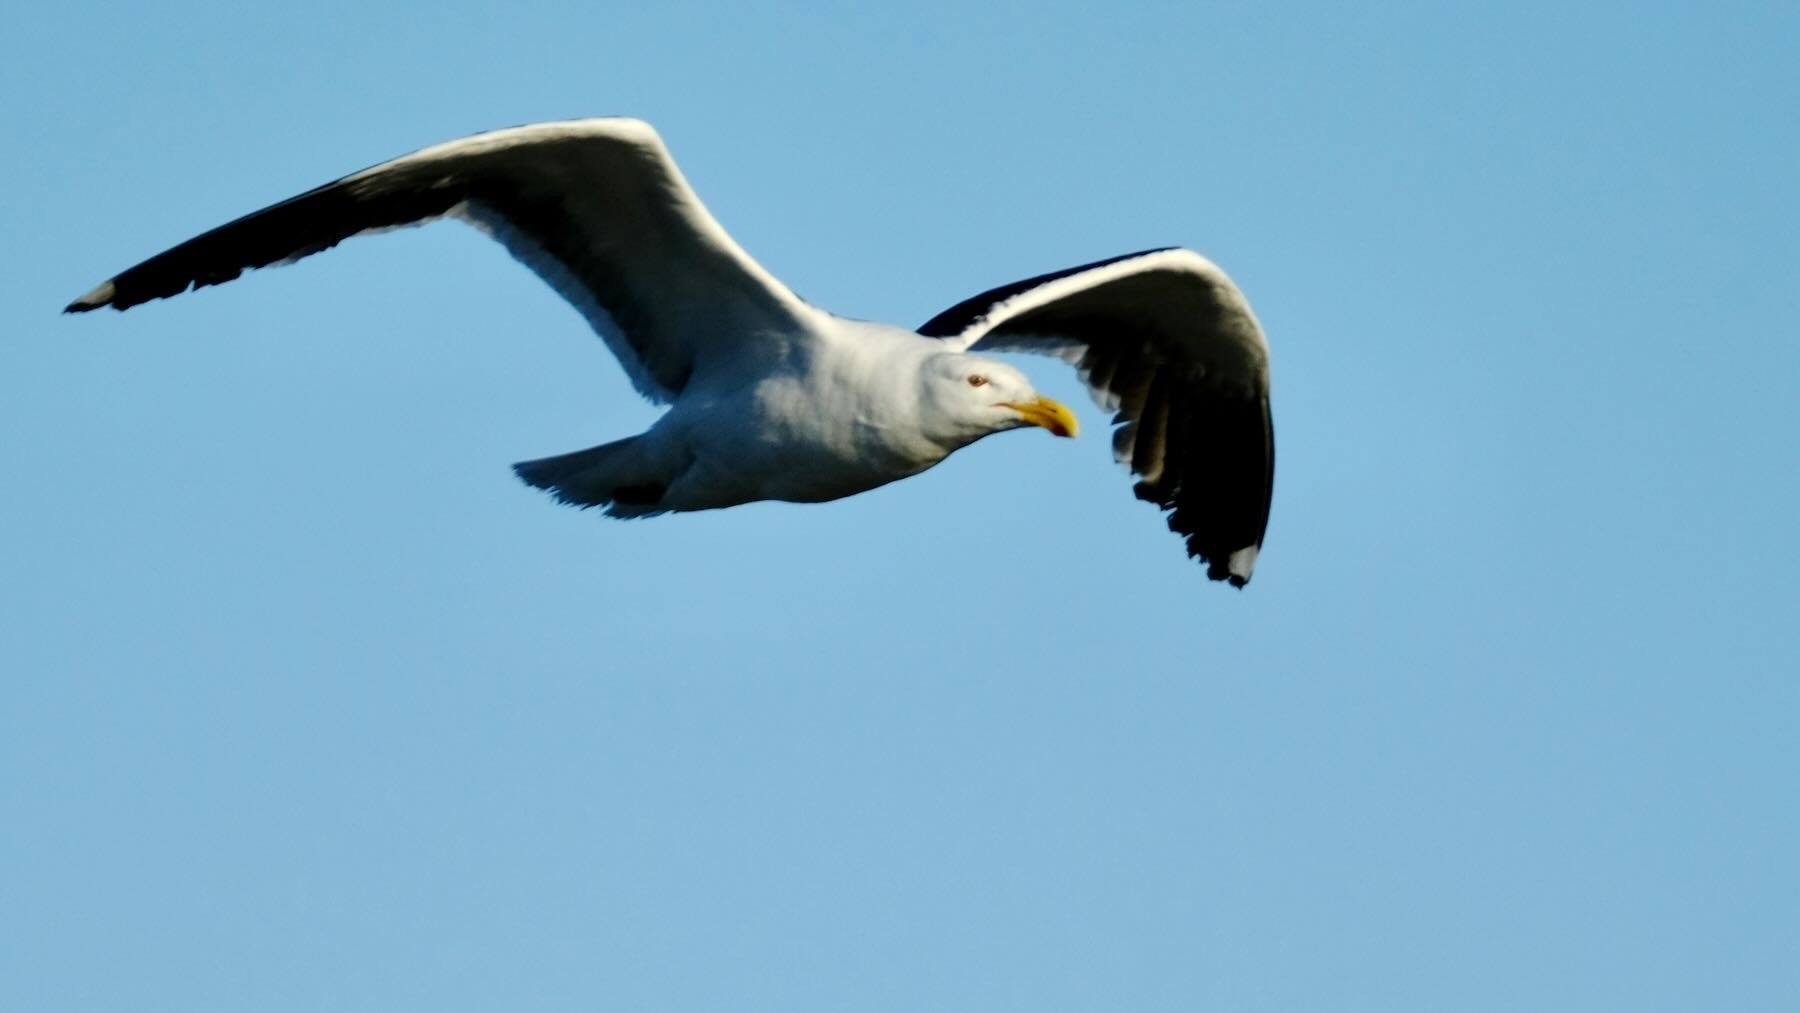 Black backed gull in flight with wings bent. 